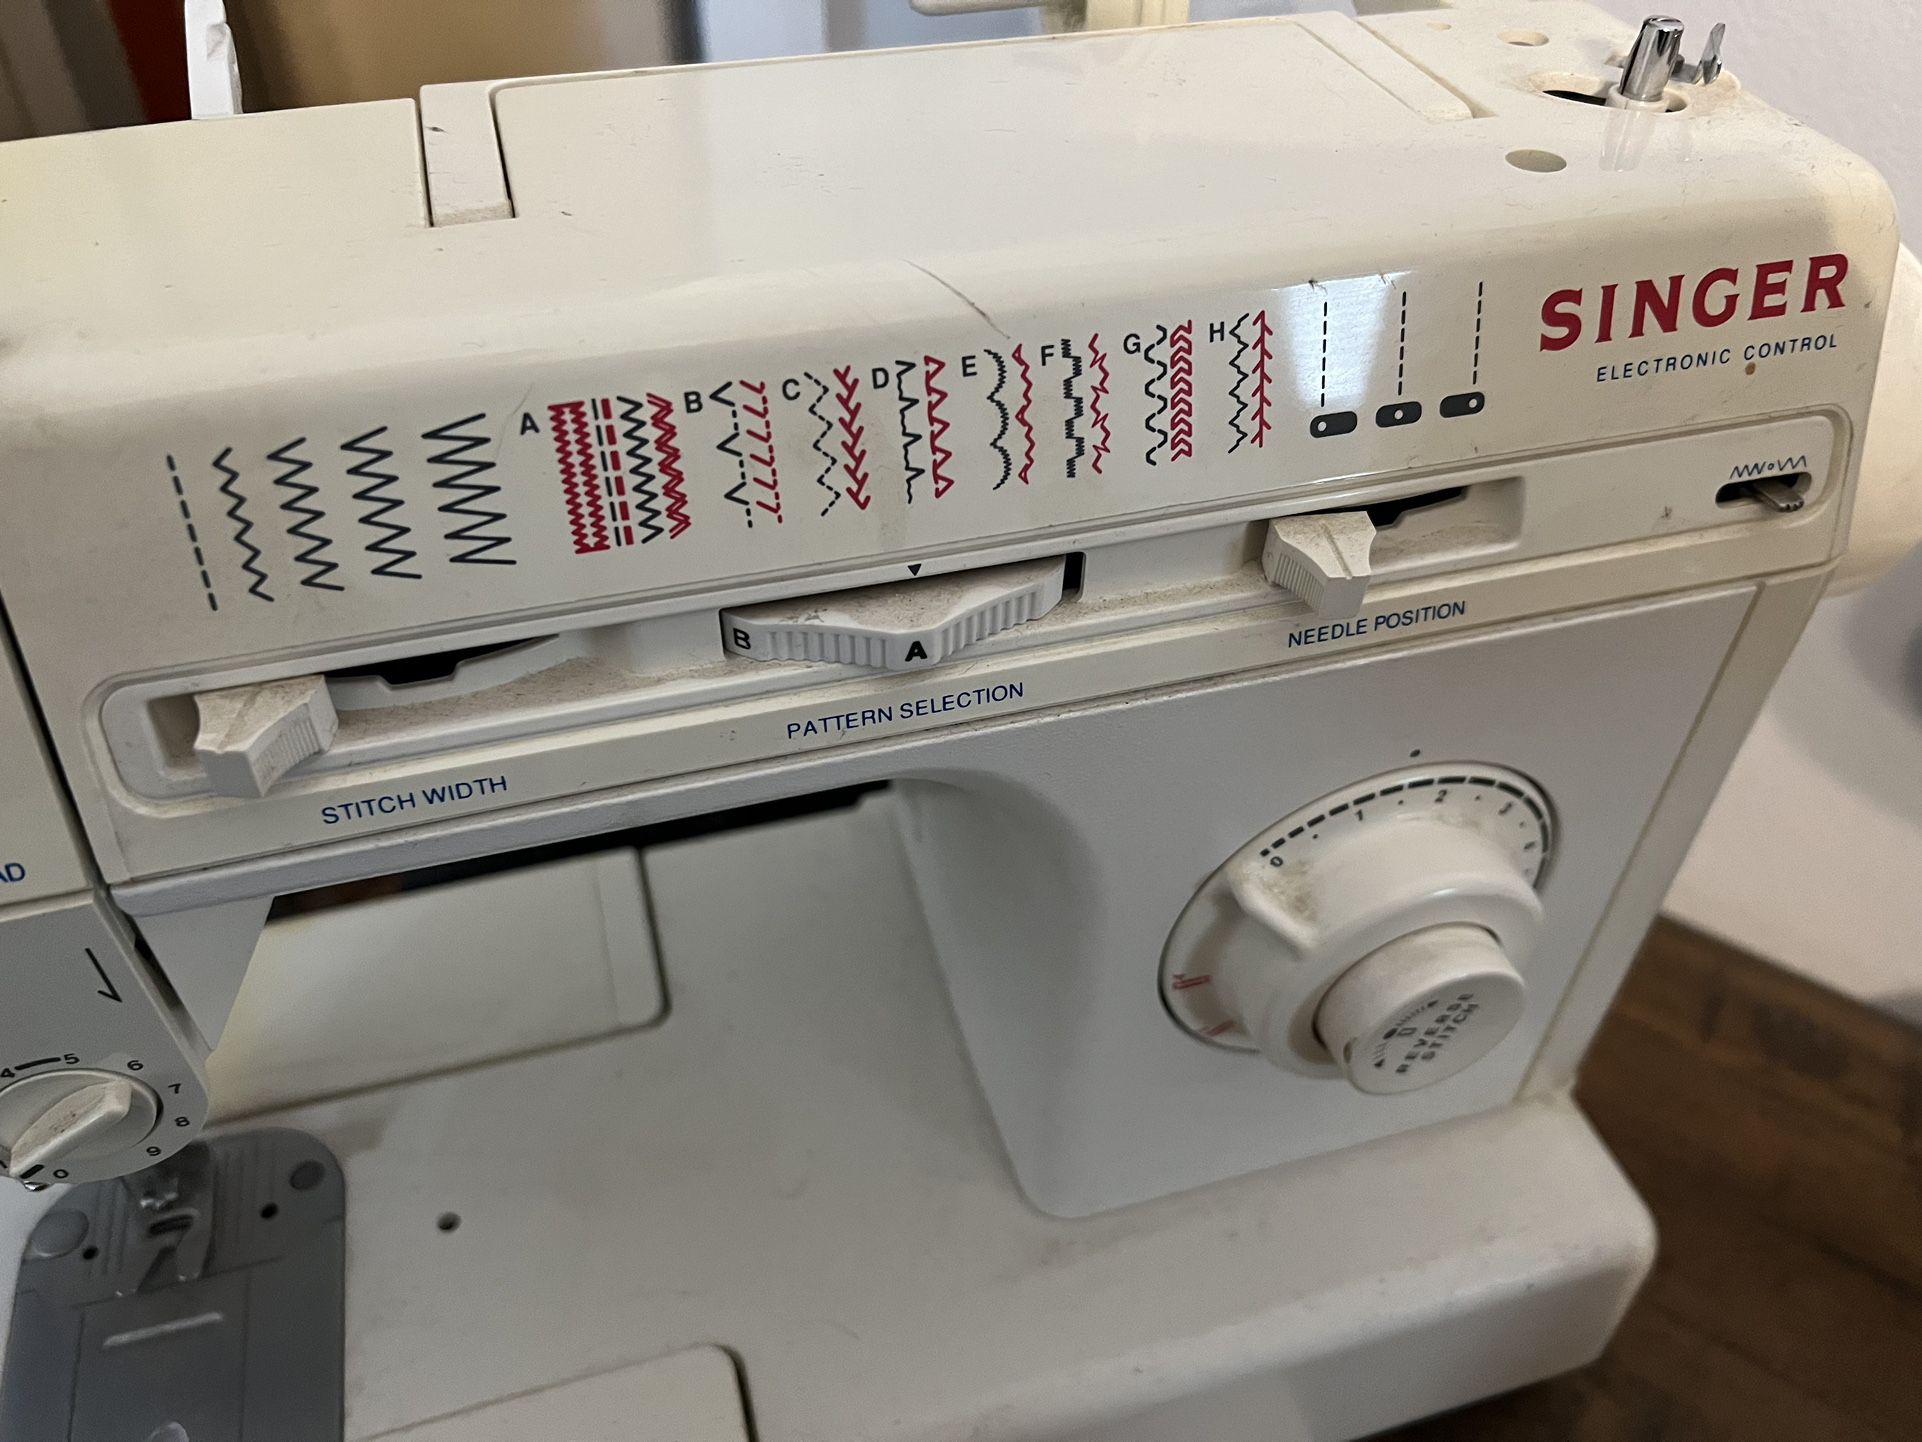 Singer Heavy Duty 4452 Sewing Machine for Sale in Lake Forest, CA - OfferUp